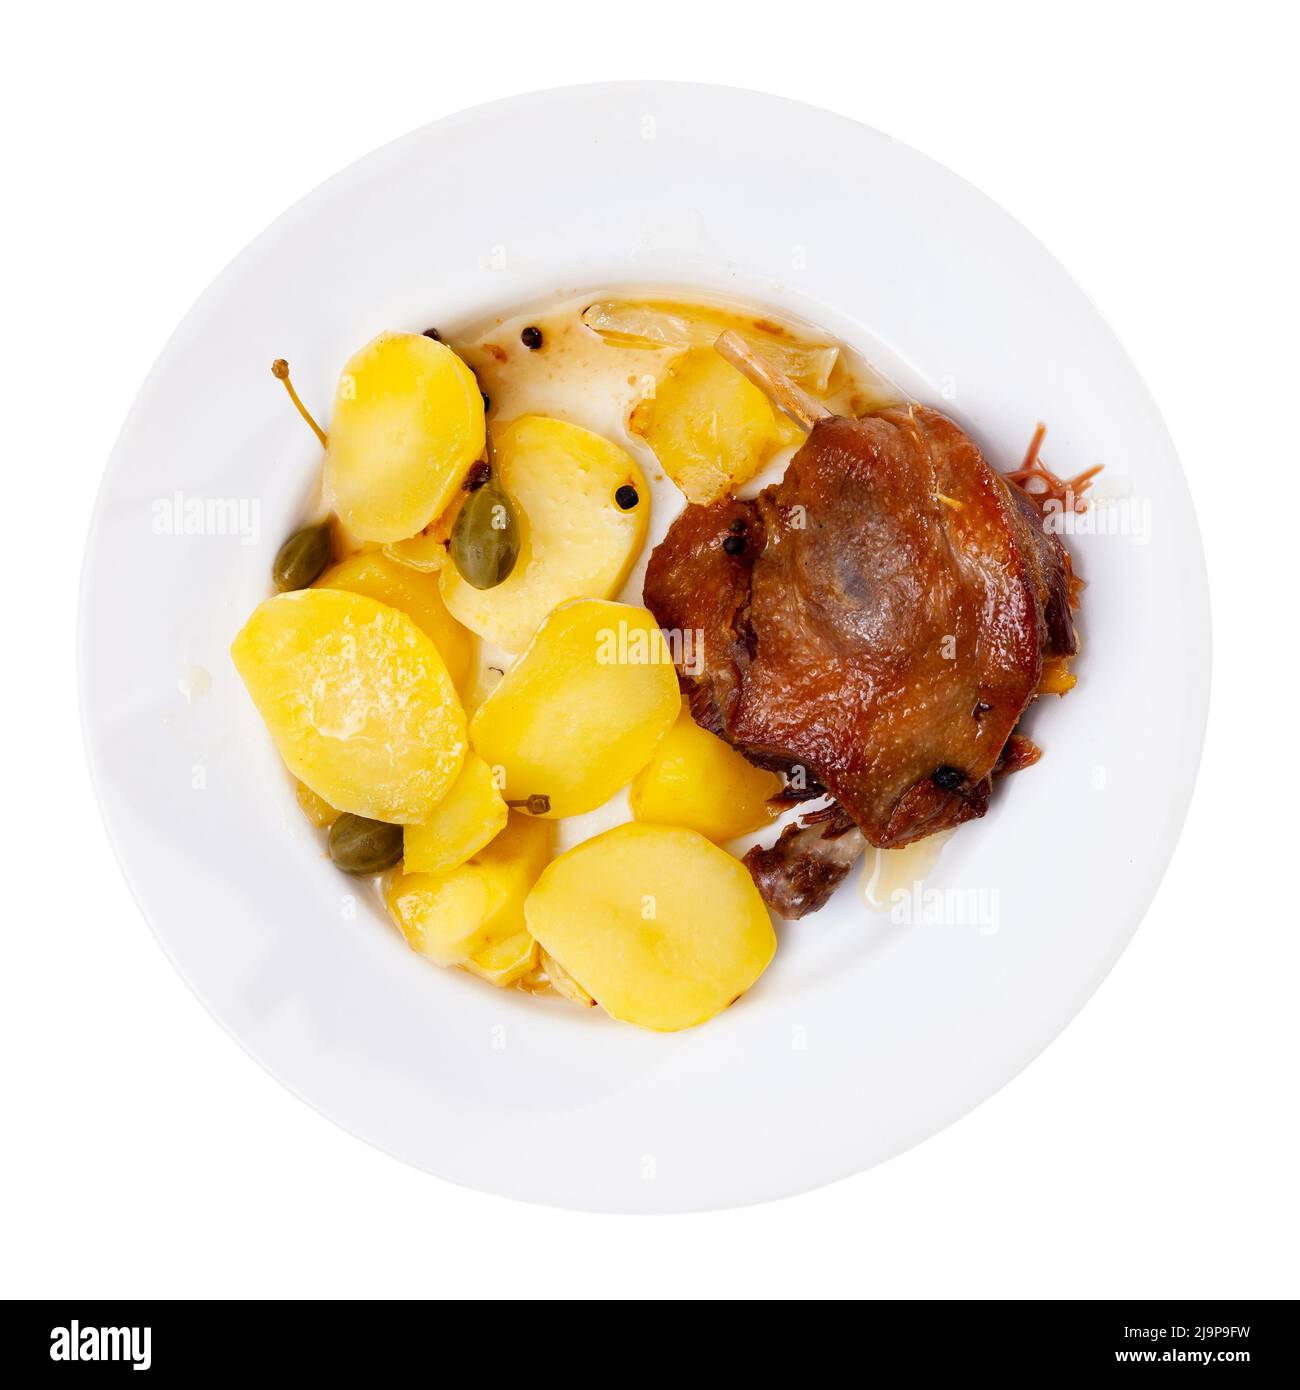 Fried duck confit with roasted potatoes Stock Photo